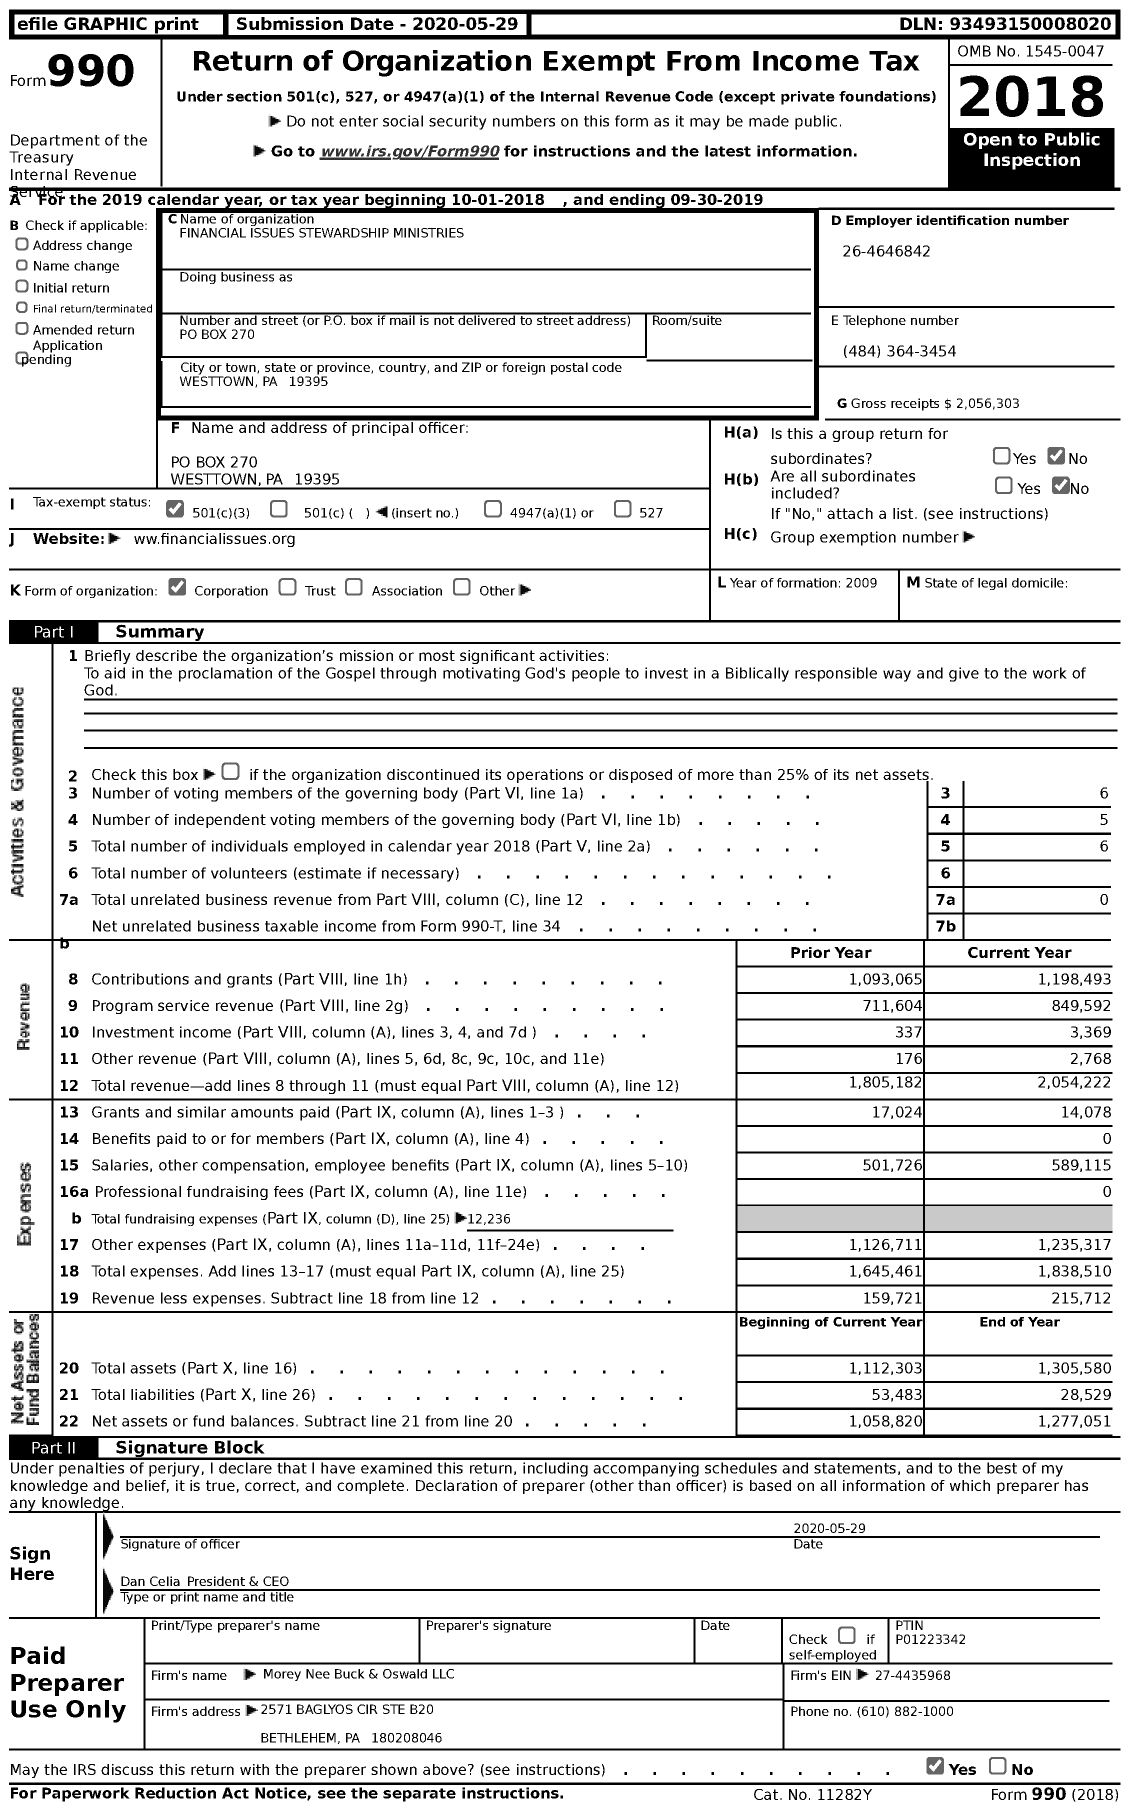 Image of first page of 2018 Form 990 for Financial Issues Stewardship Ministries (FISM)